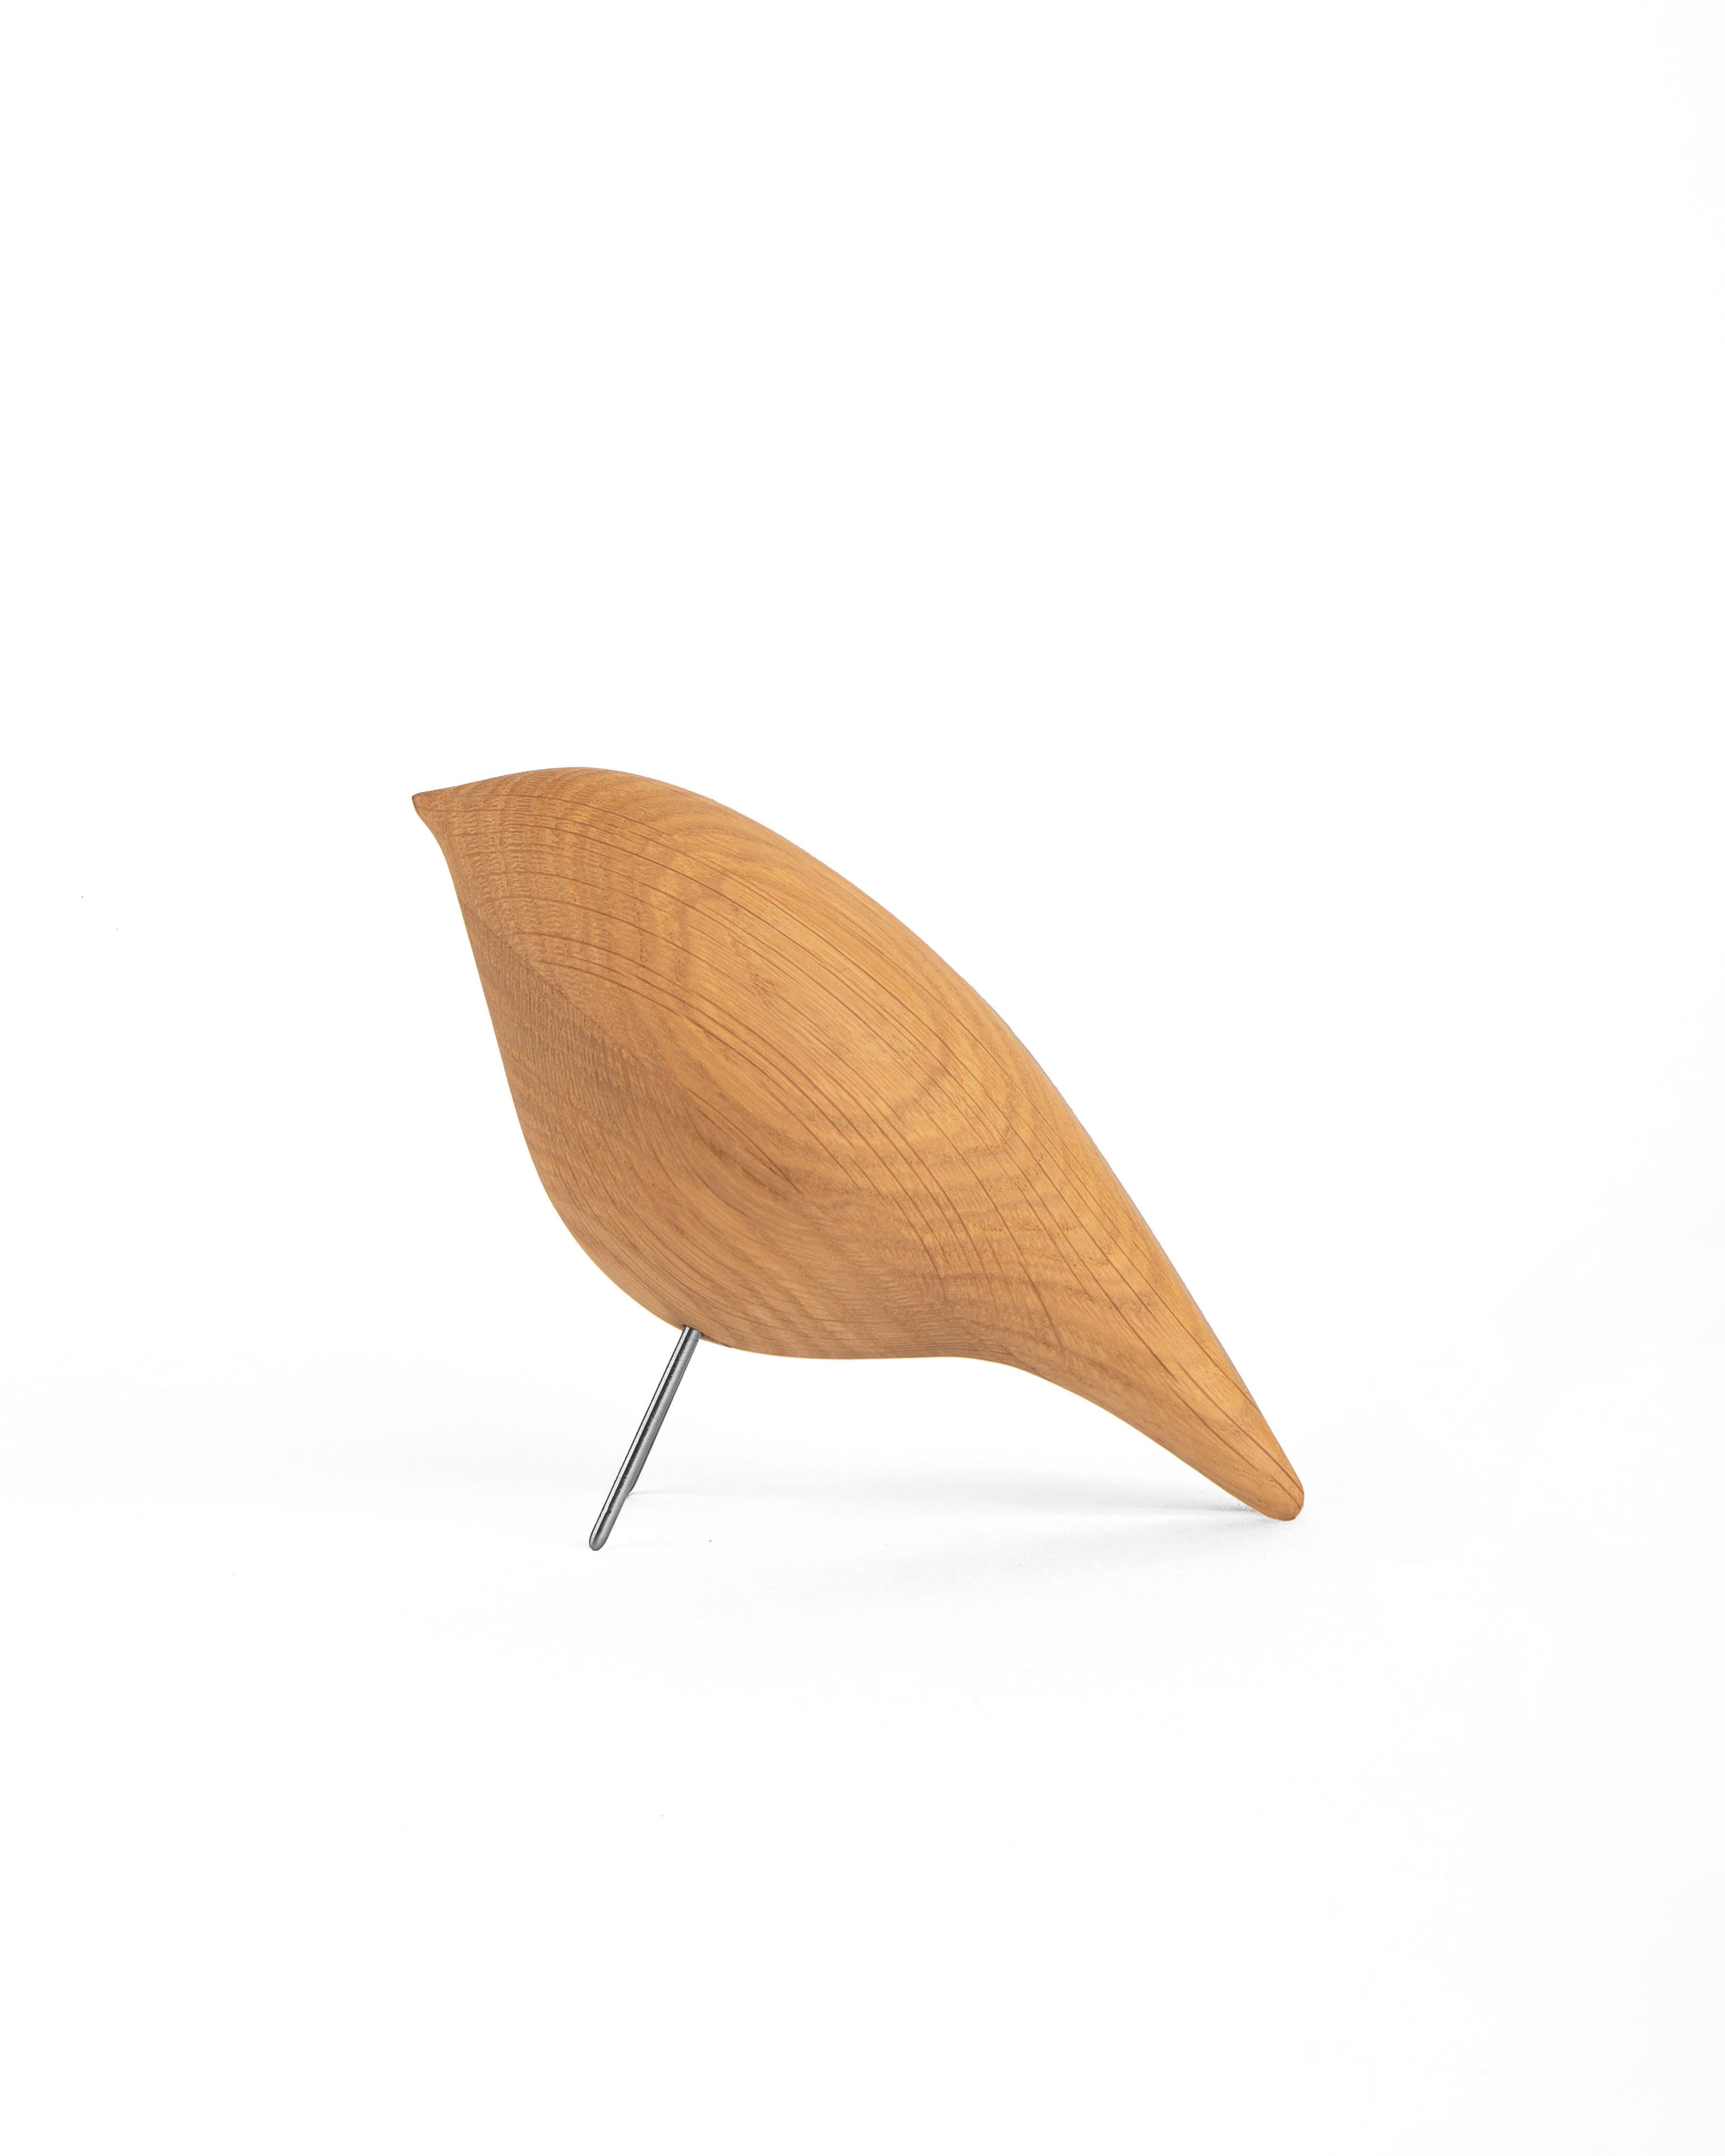 Bring a touch of whimsy to your home or office with the charming wooden bird from the Tweety series.

Designed by Kateryna Sokolova, this minimalist sculpture is an attractive accent piece that delightfully captures the beauty of